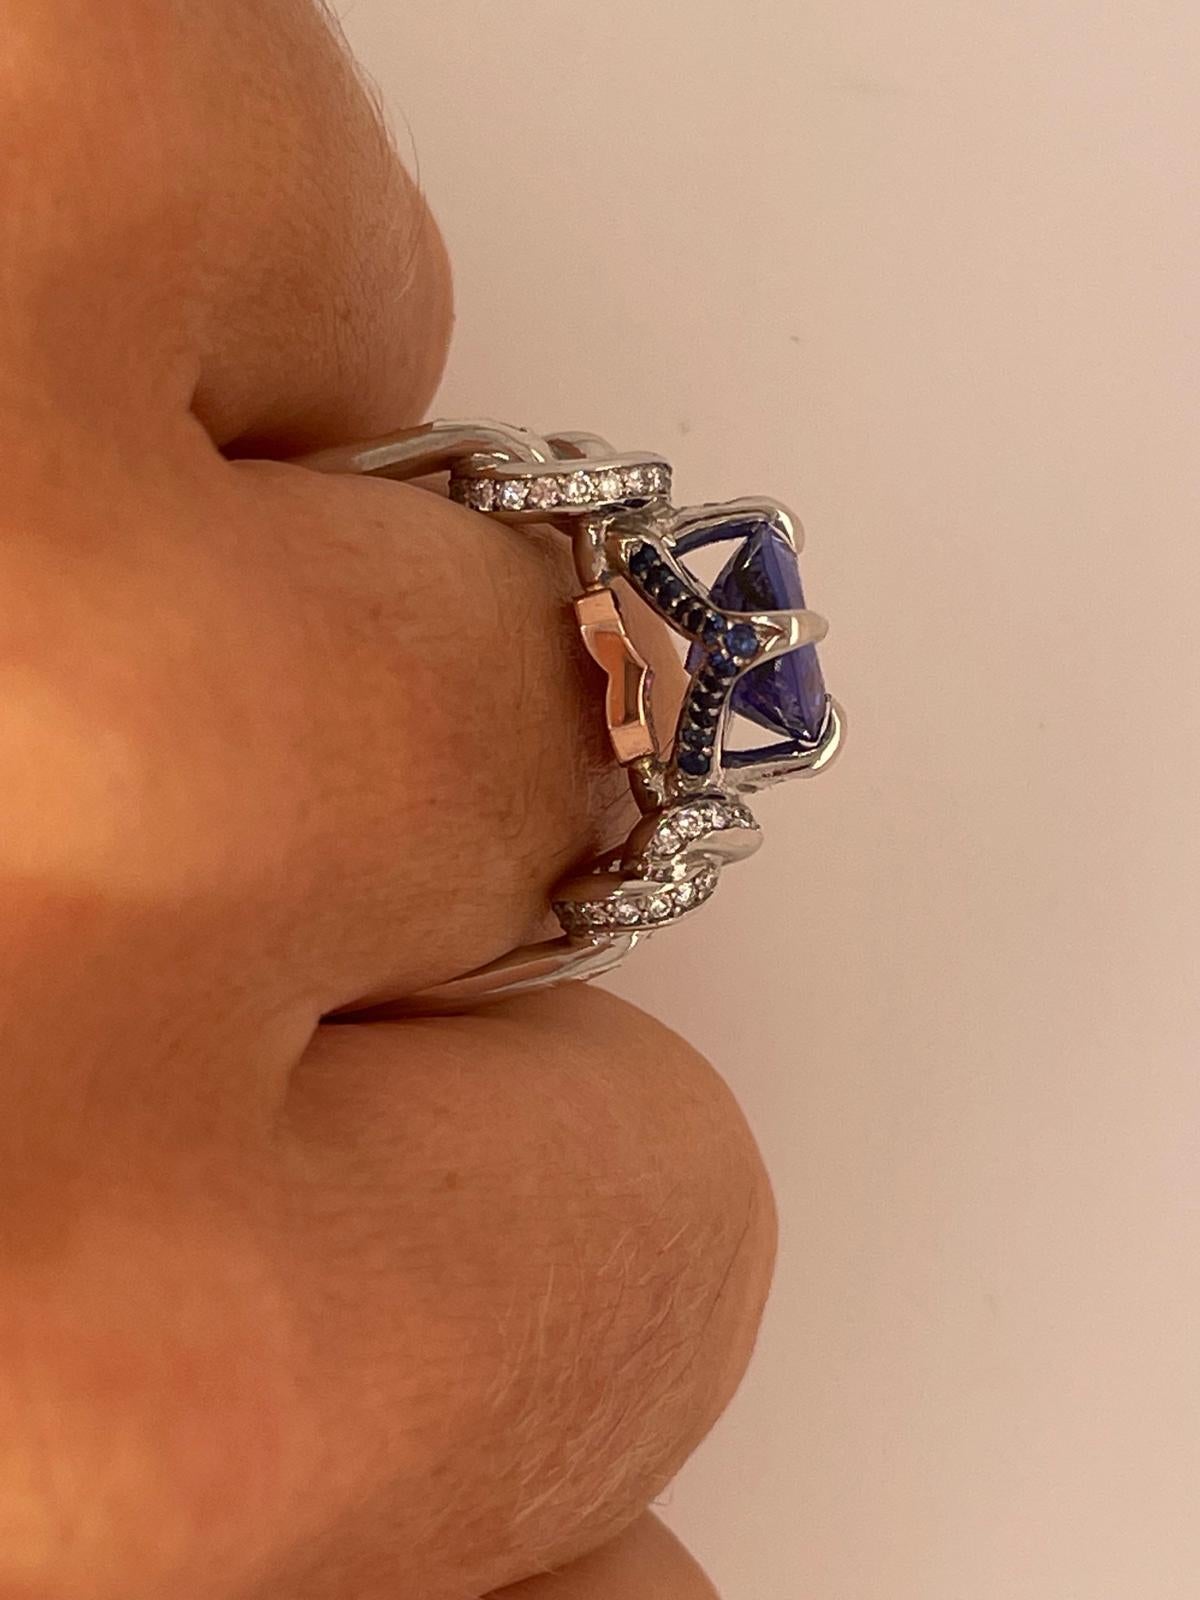 For Sale:  2ct tanzanite and diamond ring in platinum and rose gold  Forget me knot ring  12